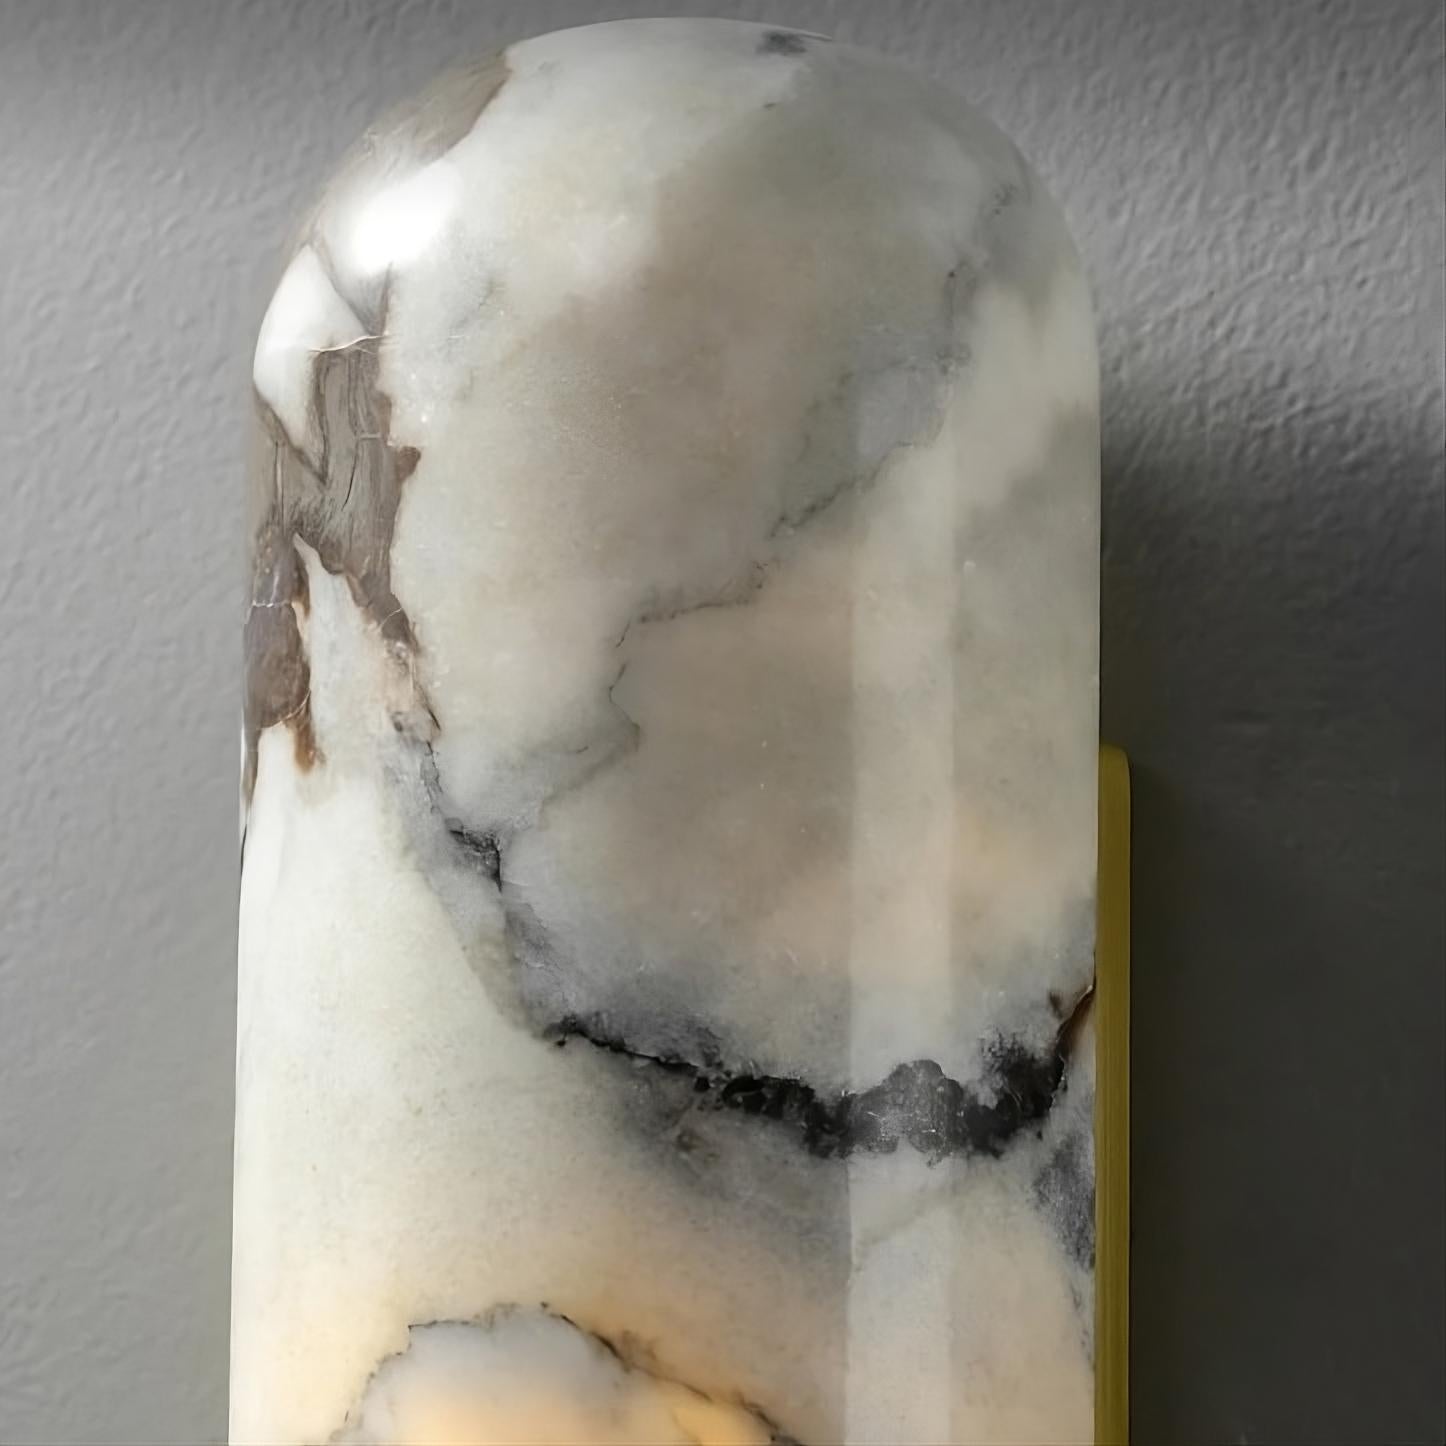 A close-up image of the Natural Marble Wall Sconce Light Fixture by Morsale.com made of natural marble. The unique patterned sconce features a polished, cylindrical surface with grey and white marble veining. The light subtly illuminates the stone from within, highlighting its texture and color variations.